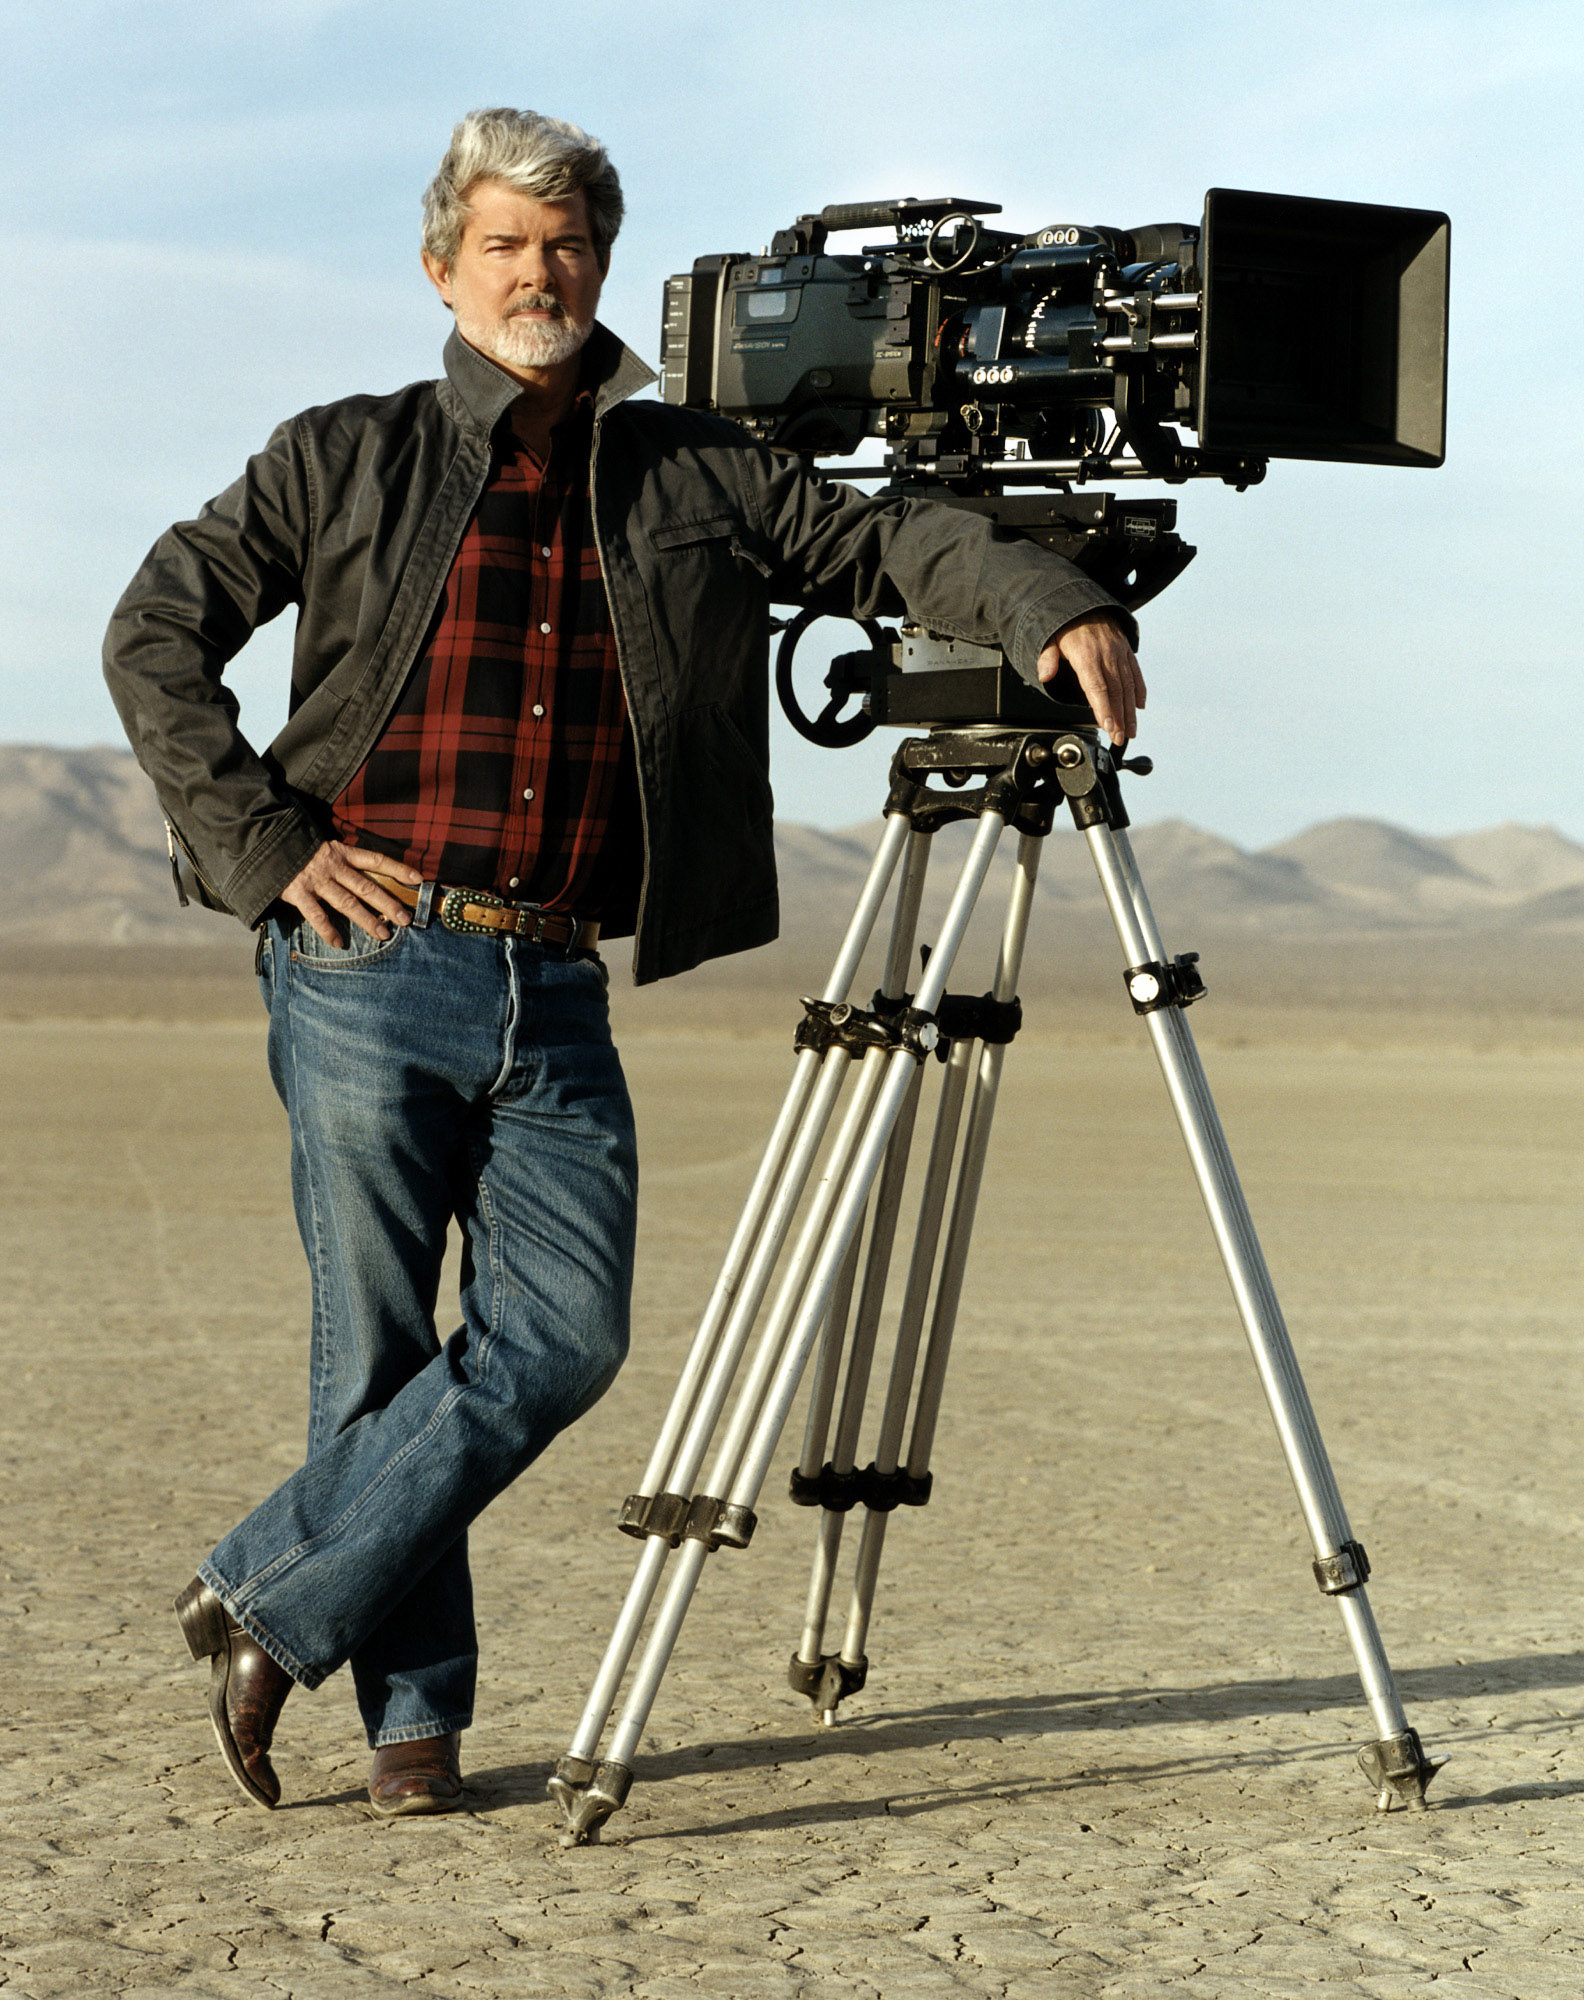 used to shoot, 'Star Wars: Episode II Attack of the Clones,' on the set of the film.    Lucas shot the entire film using digital cameras and hoped to have the film shown with digital projectors in theaters. 